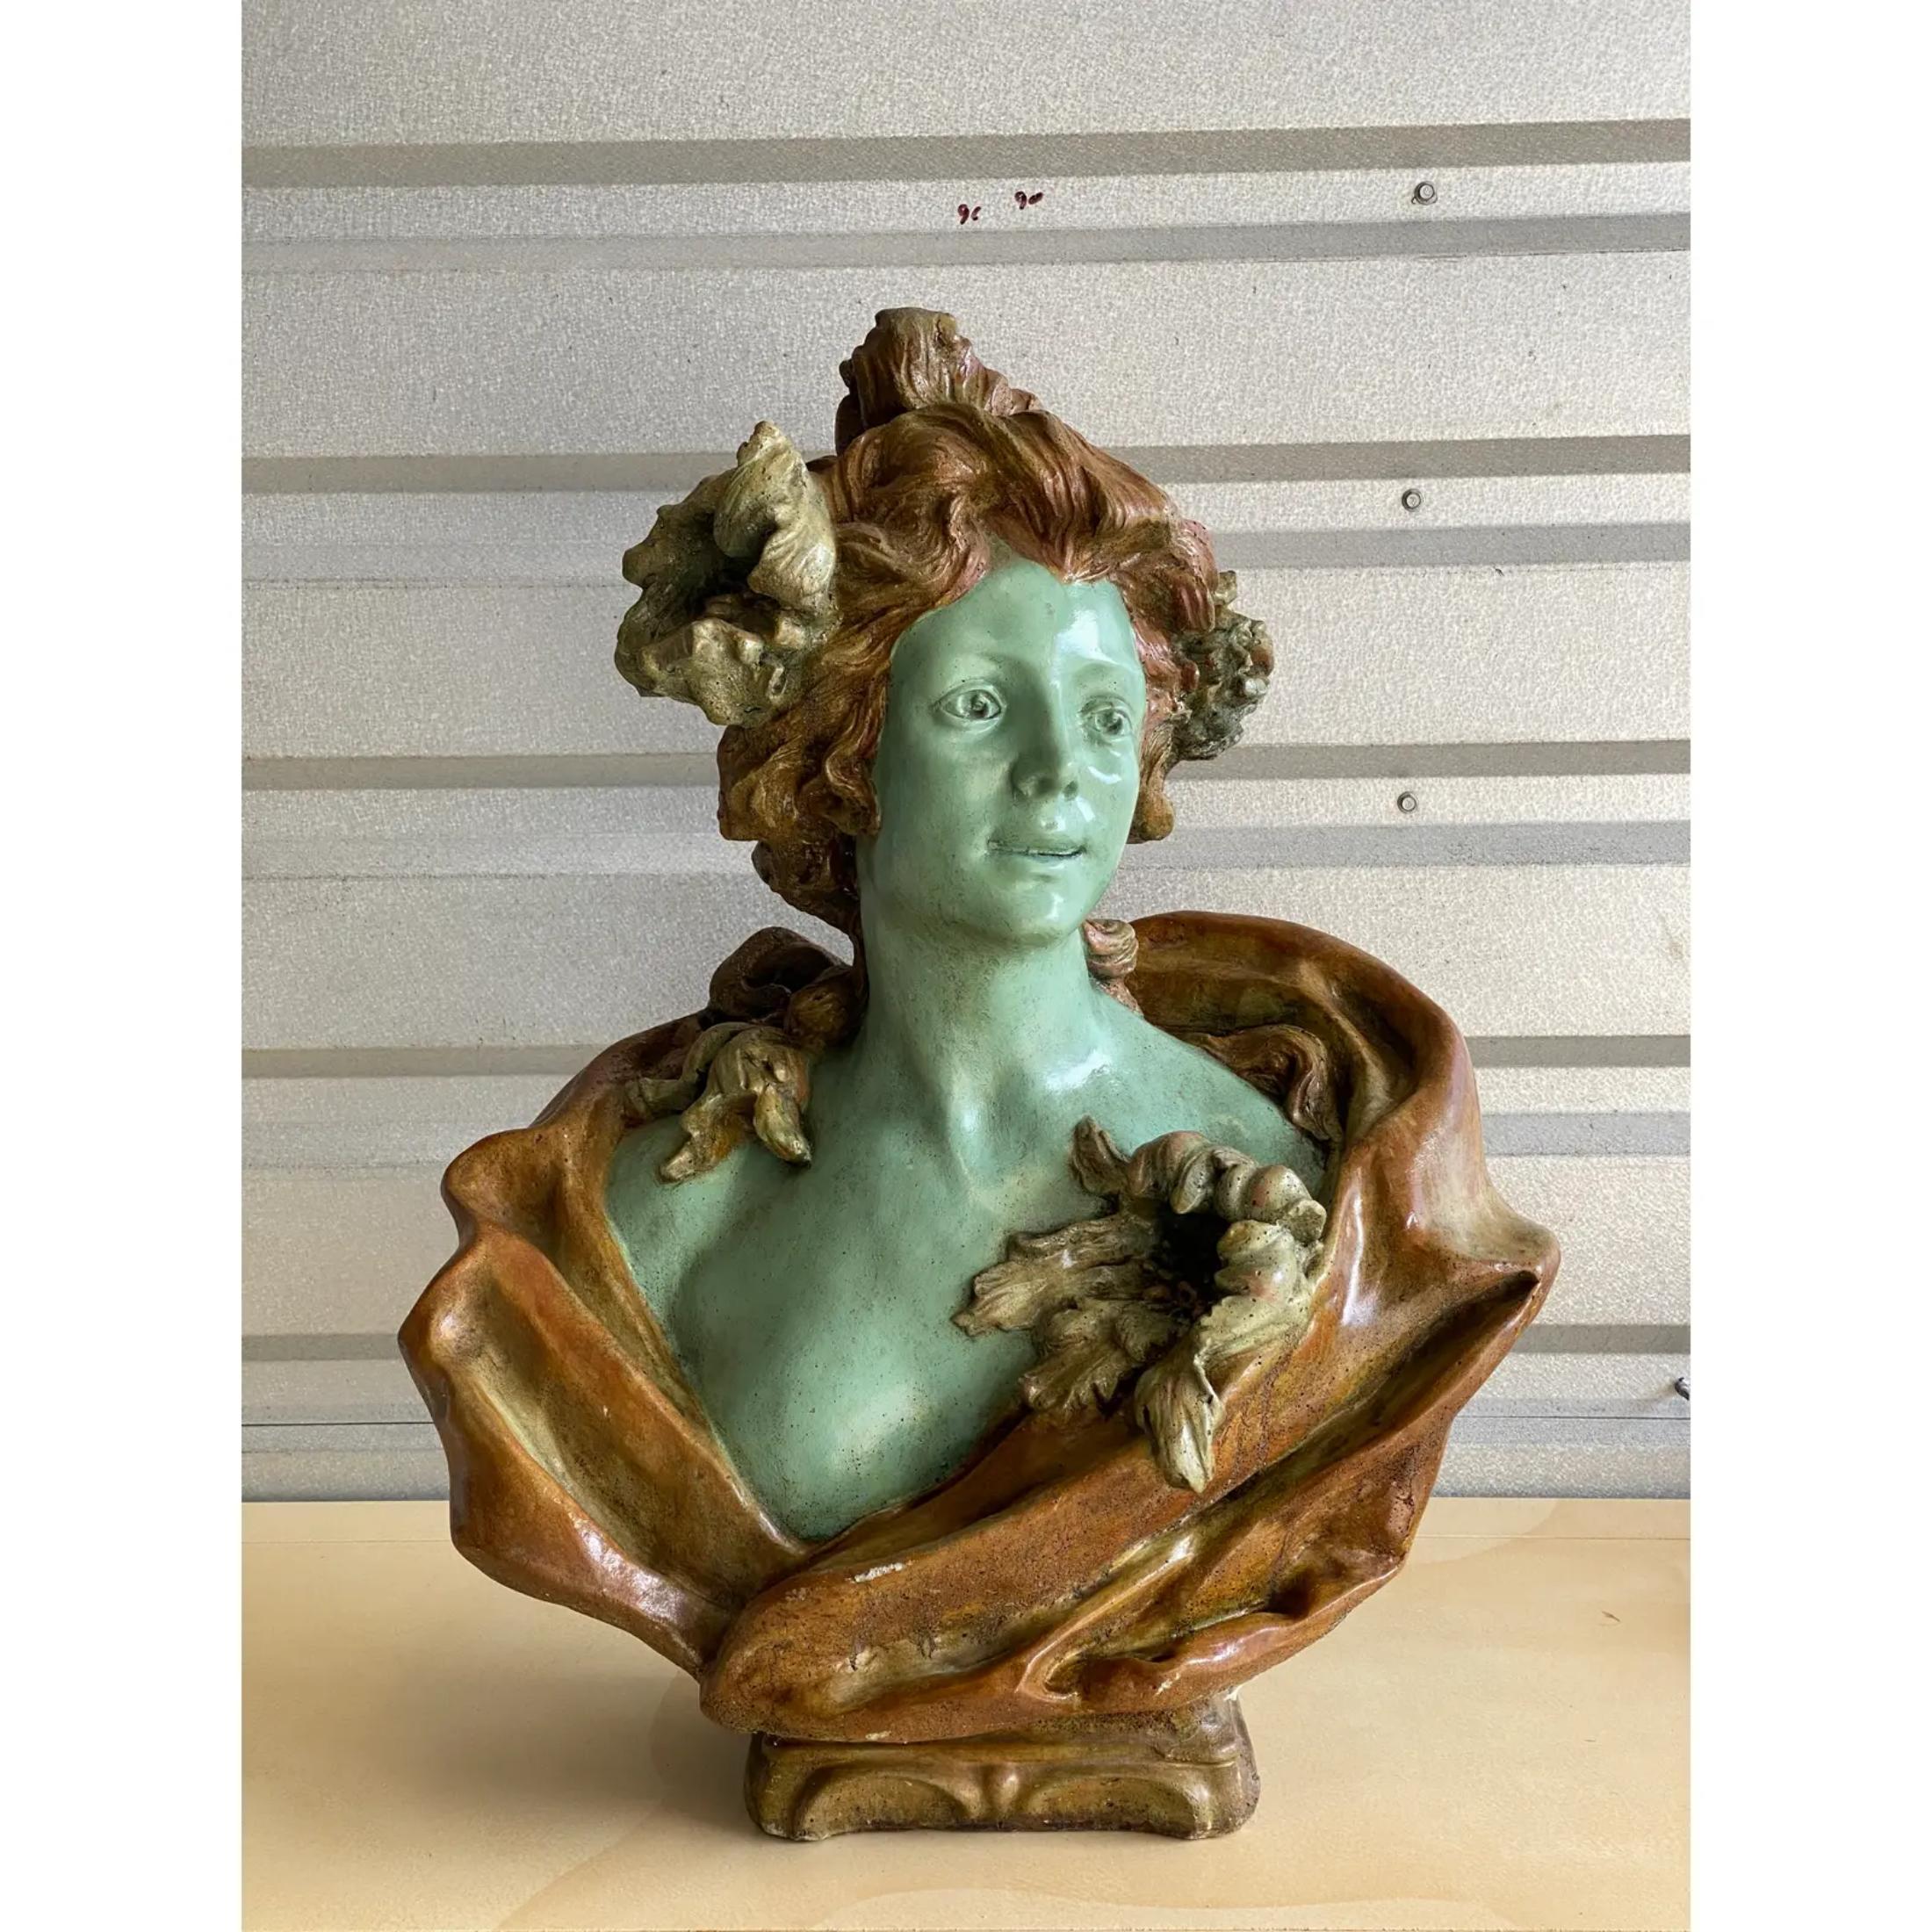 Amazing vintage Art Nouveau female bust. Stunning depiction of a female surrounded by flowers. Intriguing green skin tone. Acquired from a Palm Beach estate